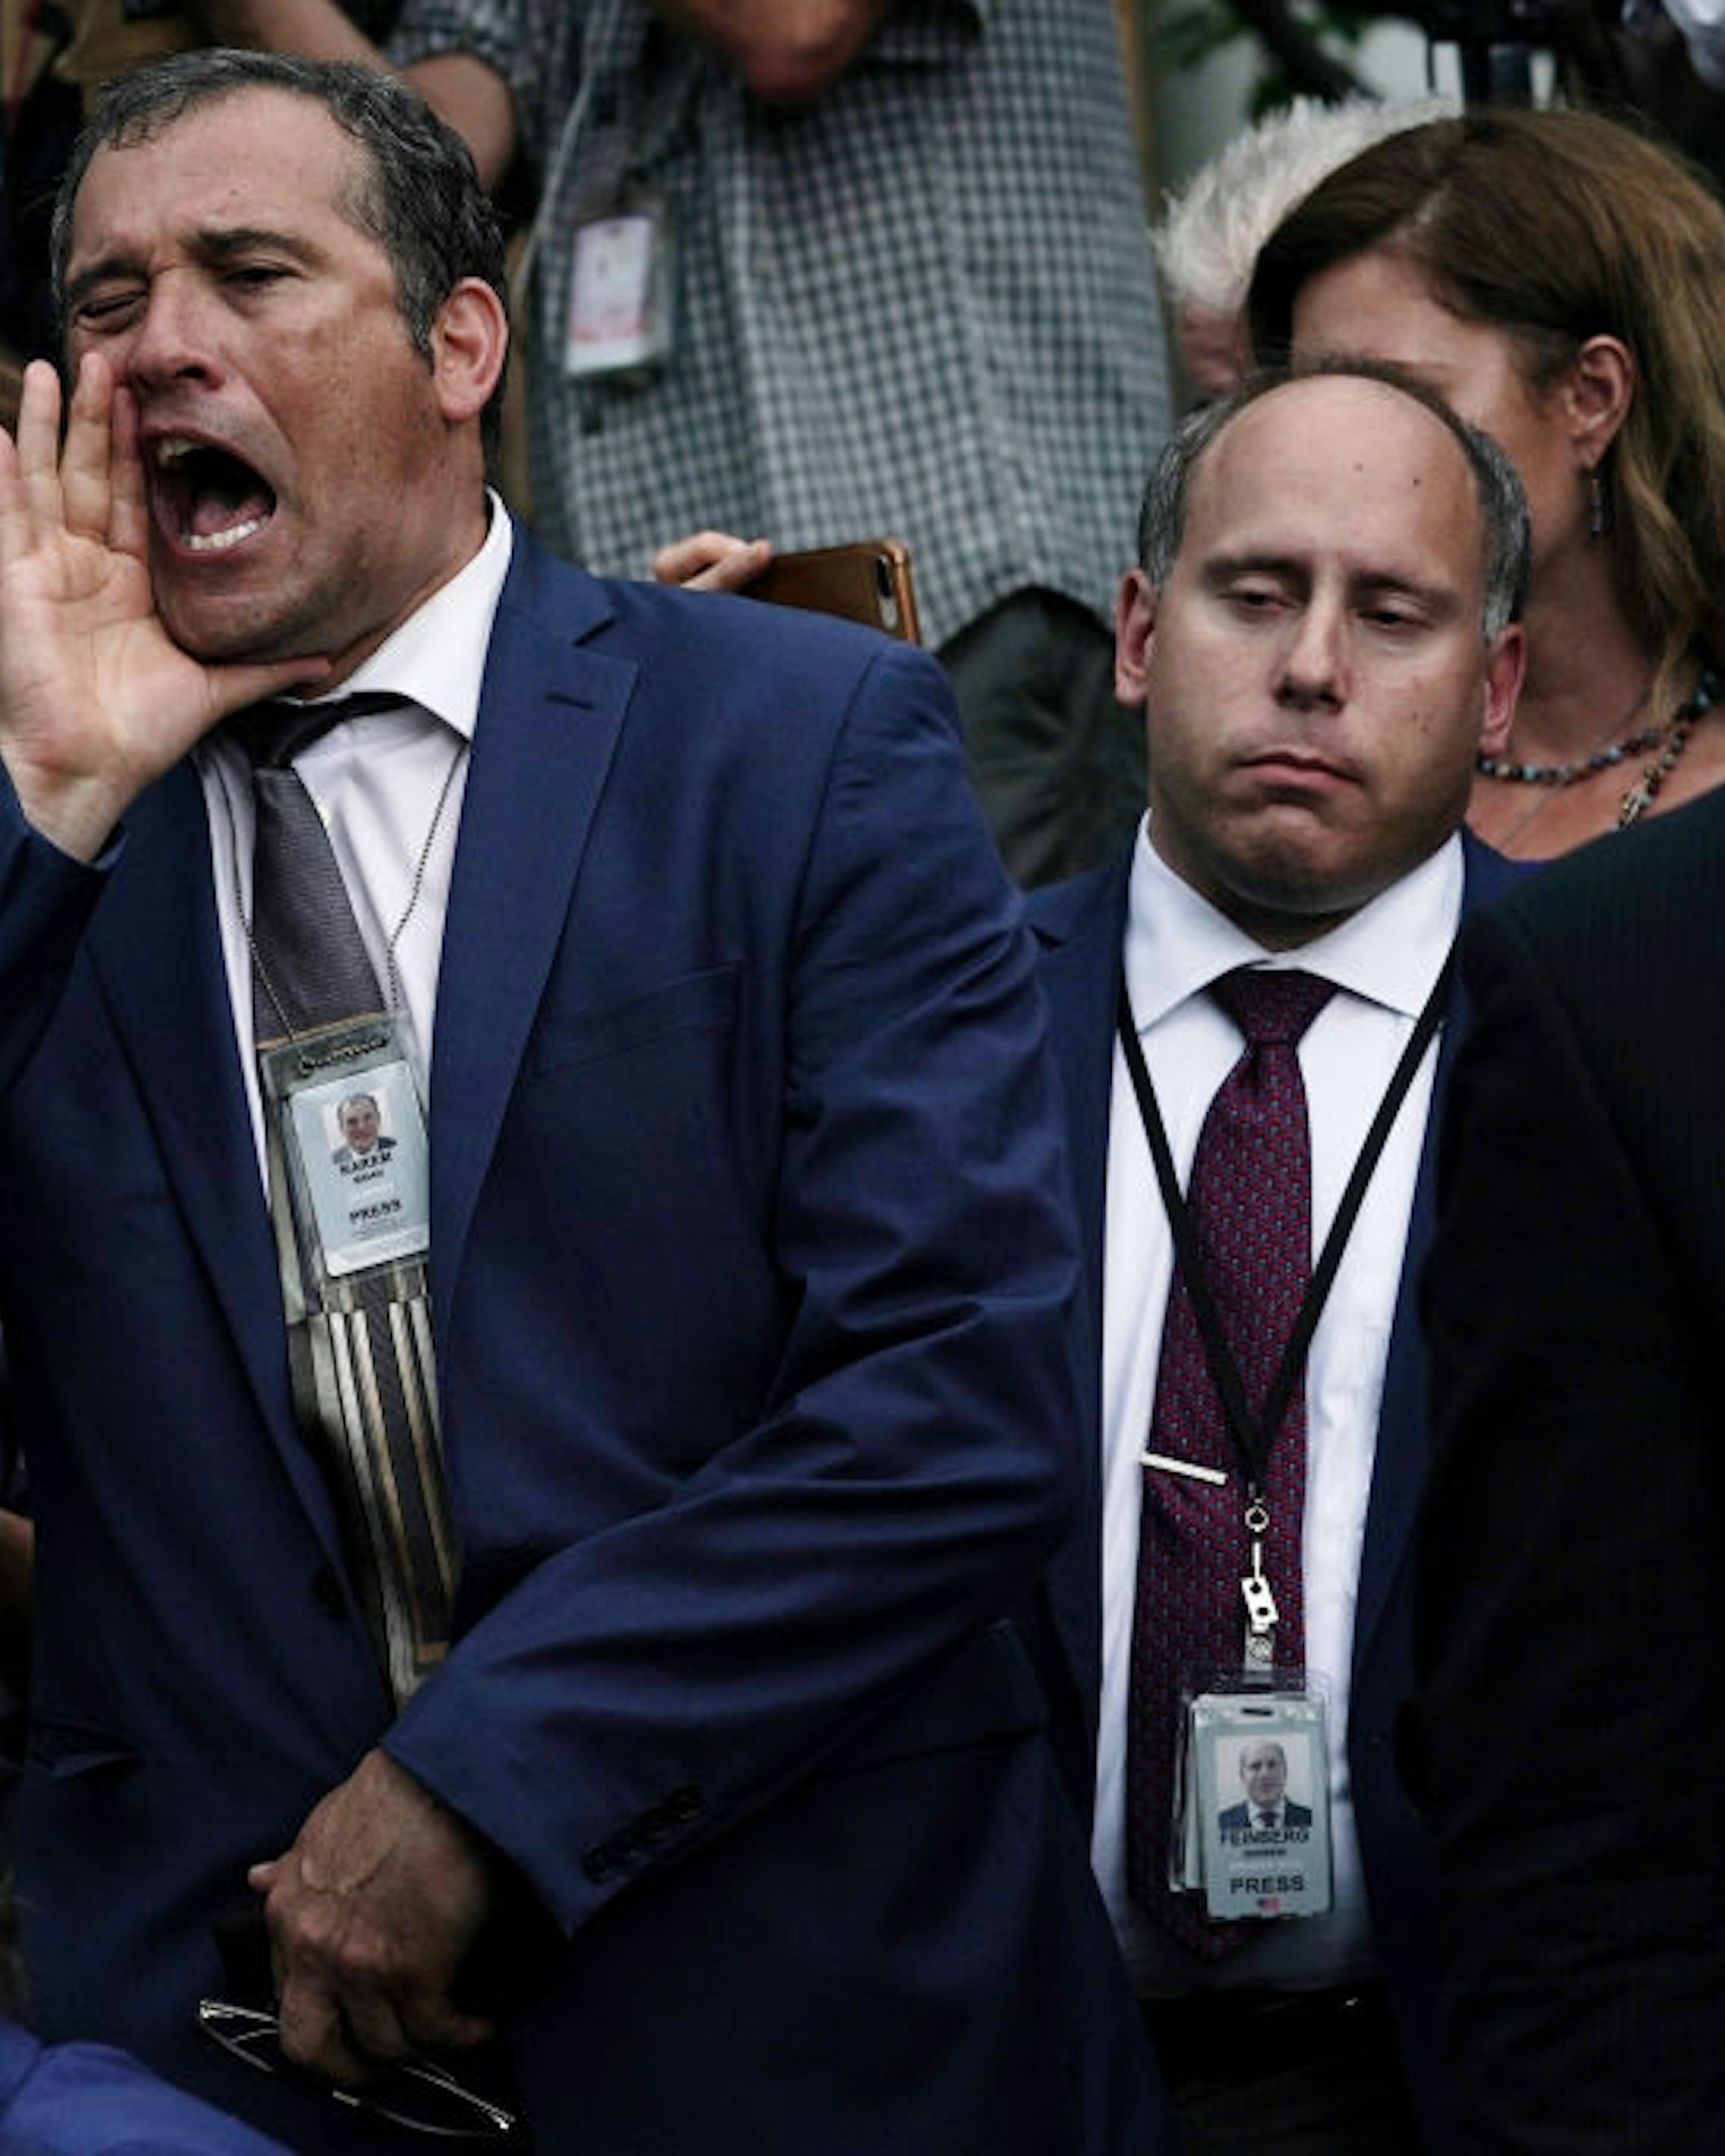 WASHINGTON, DC - JULY 11: Brian Karem of Playboy Magazine argues with conservative military and intelligence analyst and former deputy assistant to President Donald Trump Sebastian Gorka after the President made a Rose Garden statement on the census July 11, 2019 at the White House in Washington, DC. President Trump, who had previously pushed to add a citizenship question to the 2020 census, announced that he would direct the Commerce Department to collect that data in other ways. (Photo by Alex Wong/Getty Images)